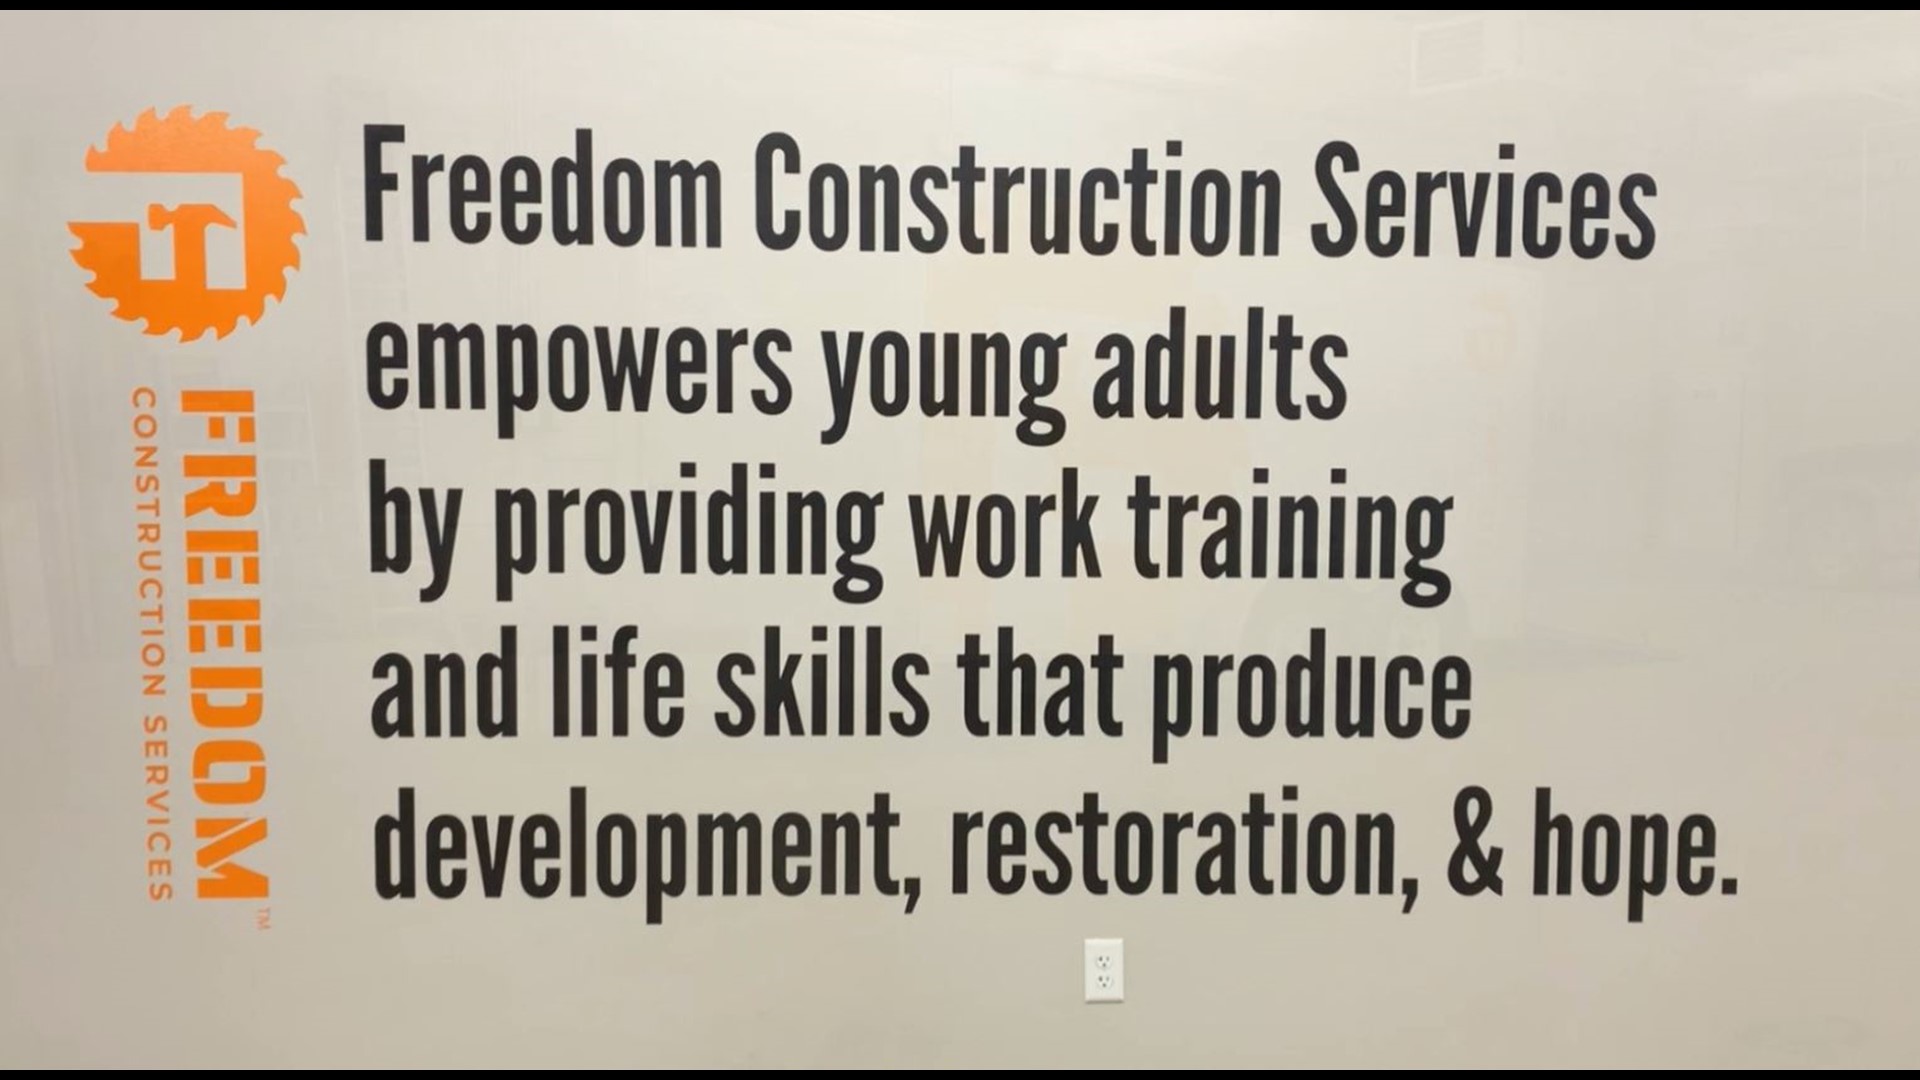 Variety, the Children's Charity helped fund Freedom Construction Services, an organization that teaches trade and life skills to youth in central Iowa.